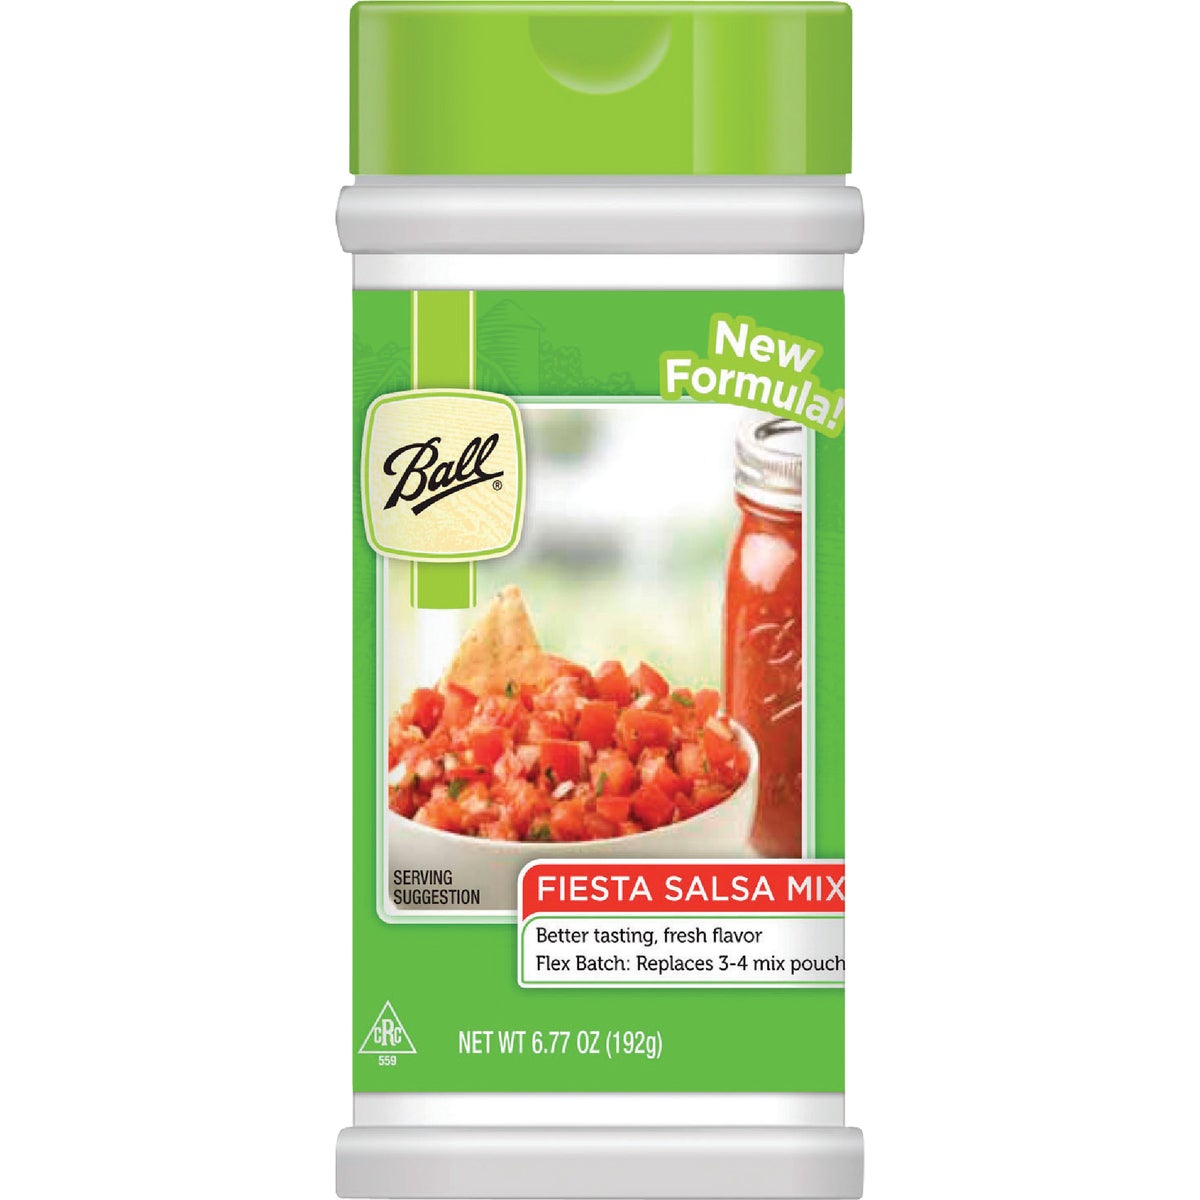 Item 623837, We have reformulated the Ball Fiesta Salsa Mix for better flavor.